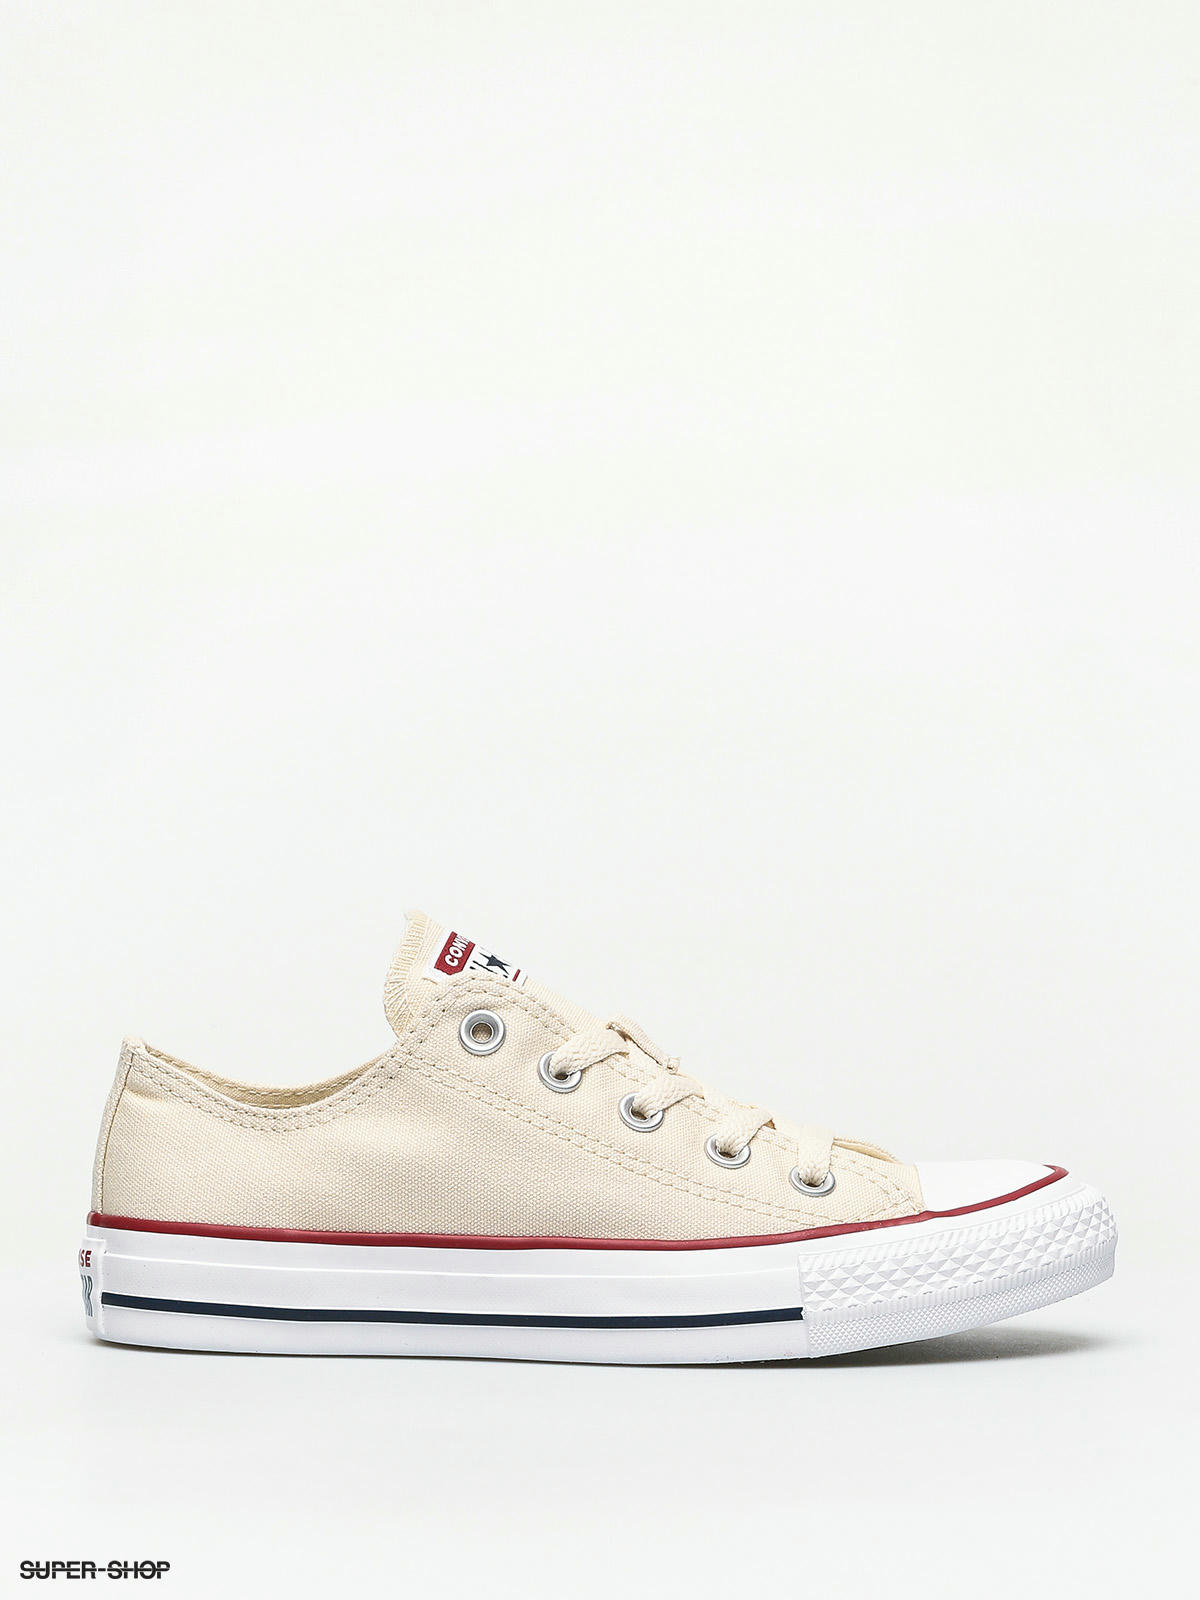 converse all star low white